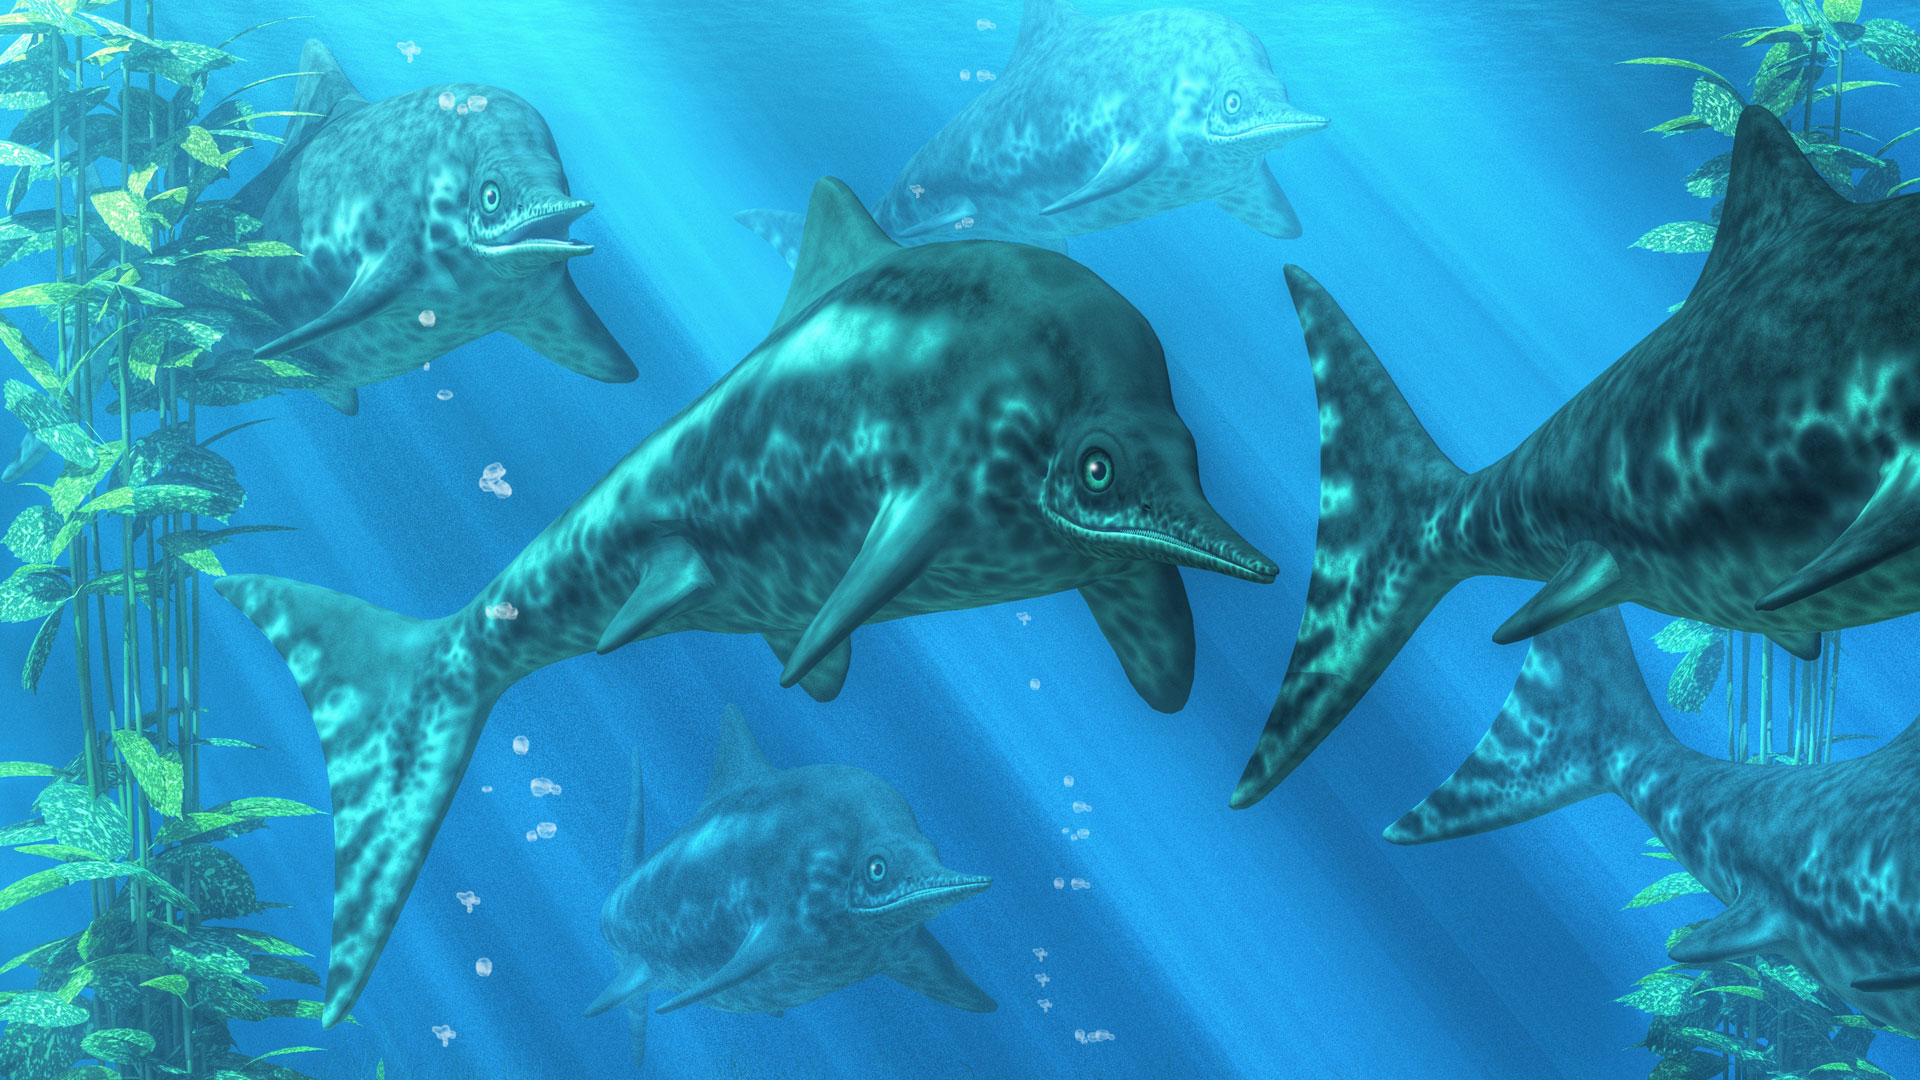 Unearthed: Enormous 100ft Sea Predator’s Remains reveal ‘Huge Jaws’ and ‘Killer Whale’ Attack Tactics